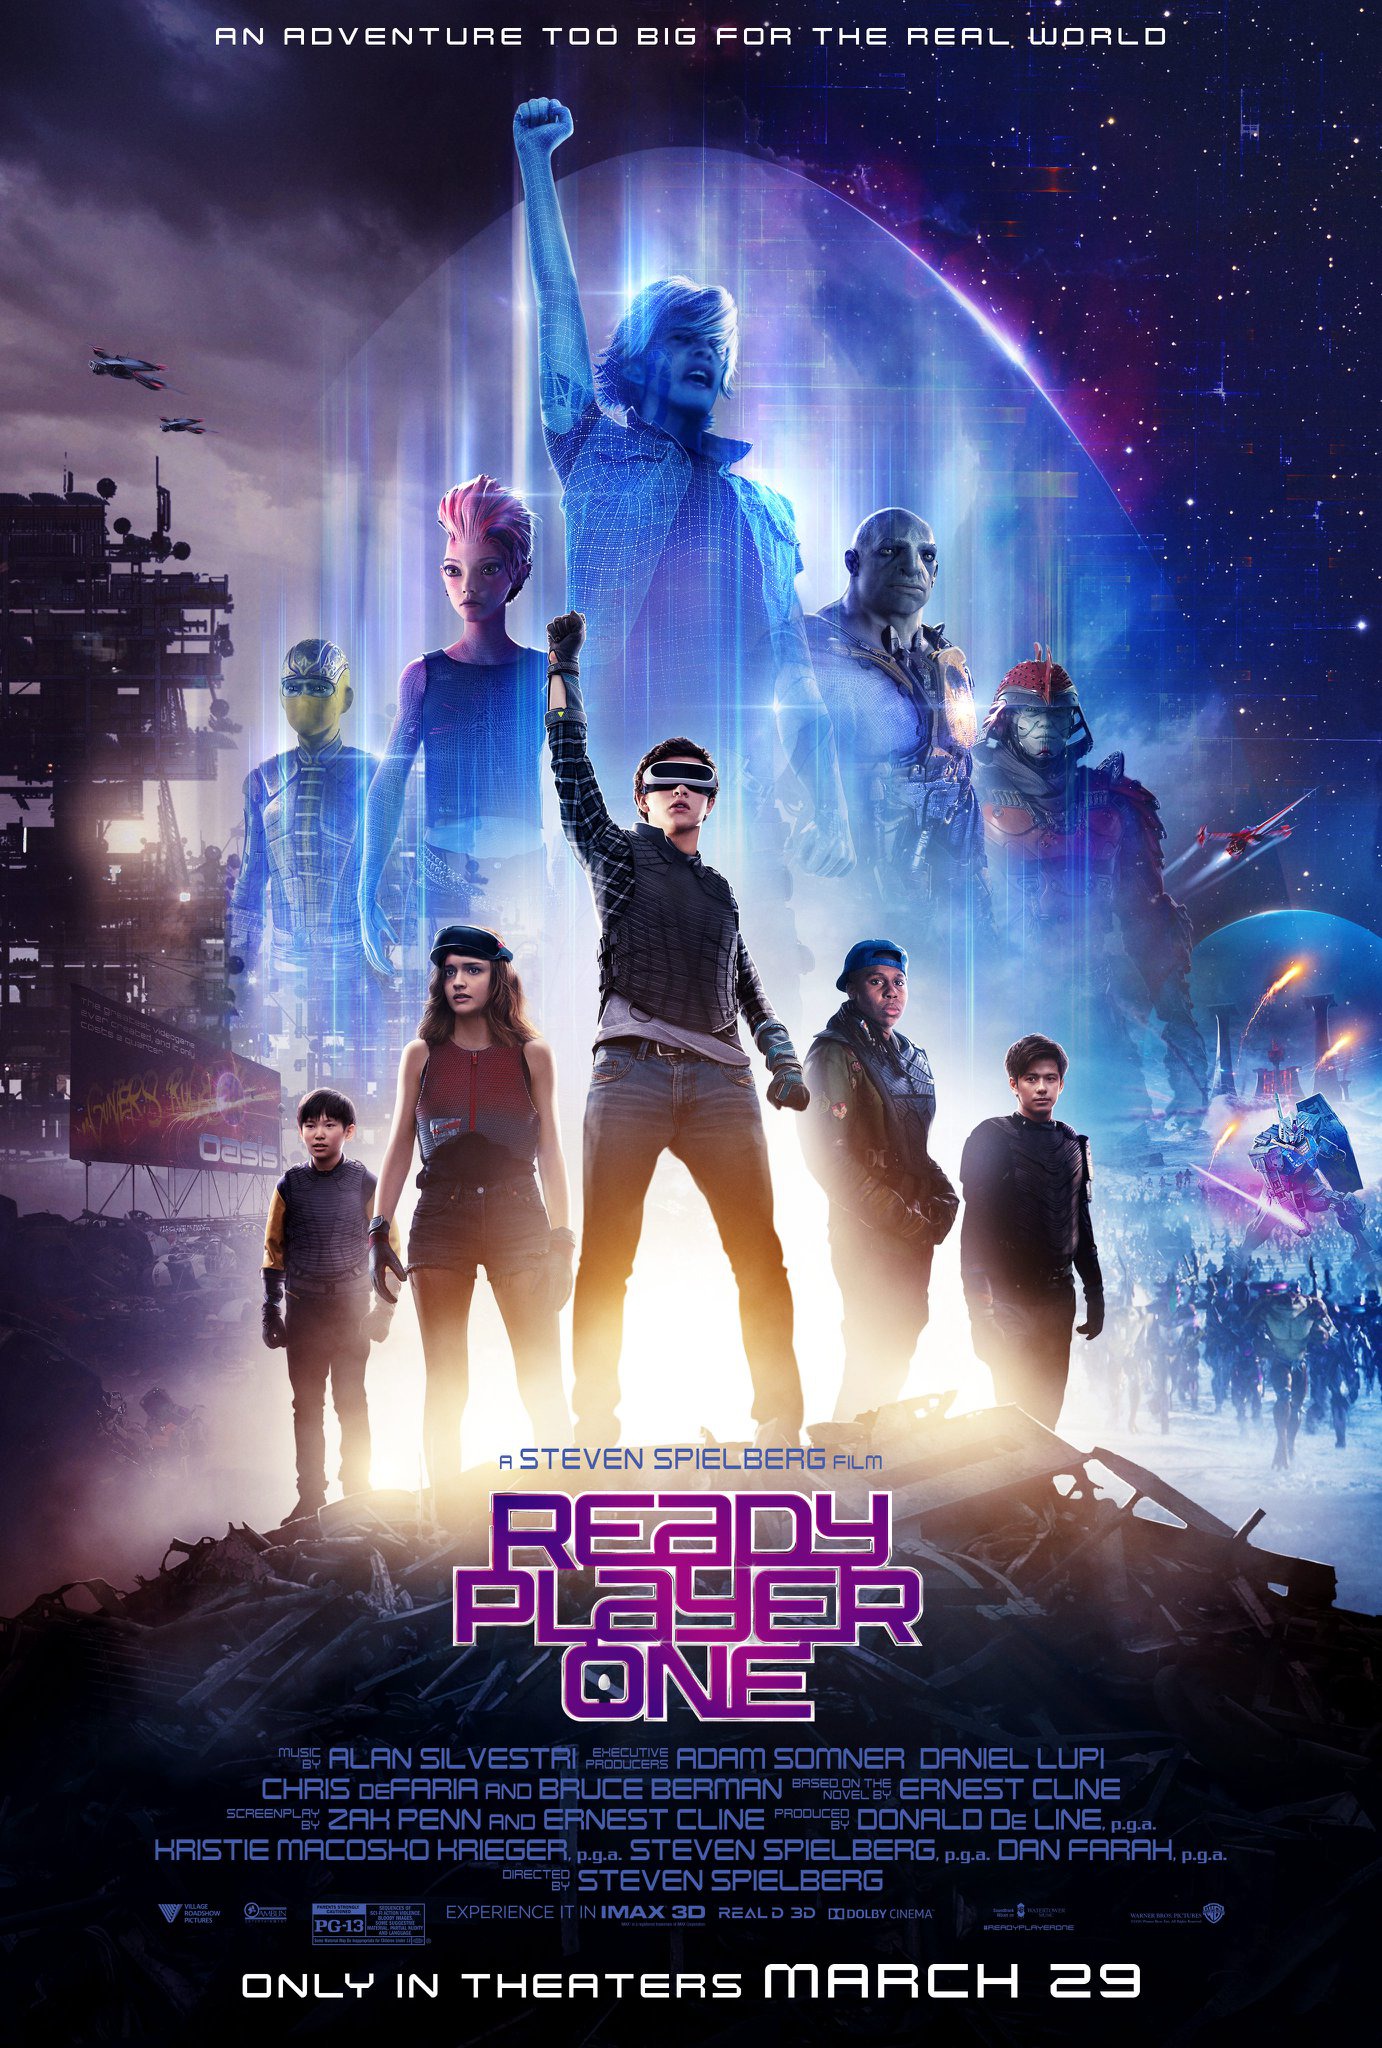 Ready Player One - Graphic Poster on Behance